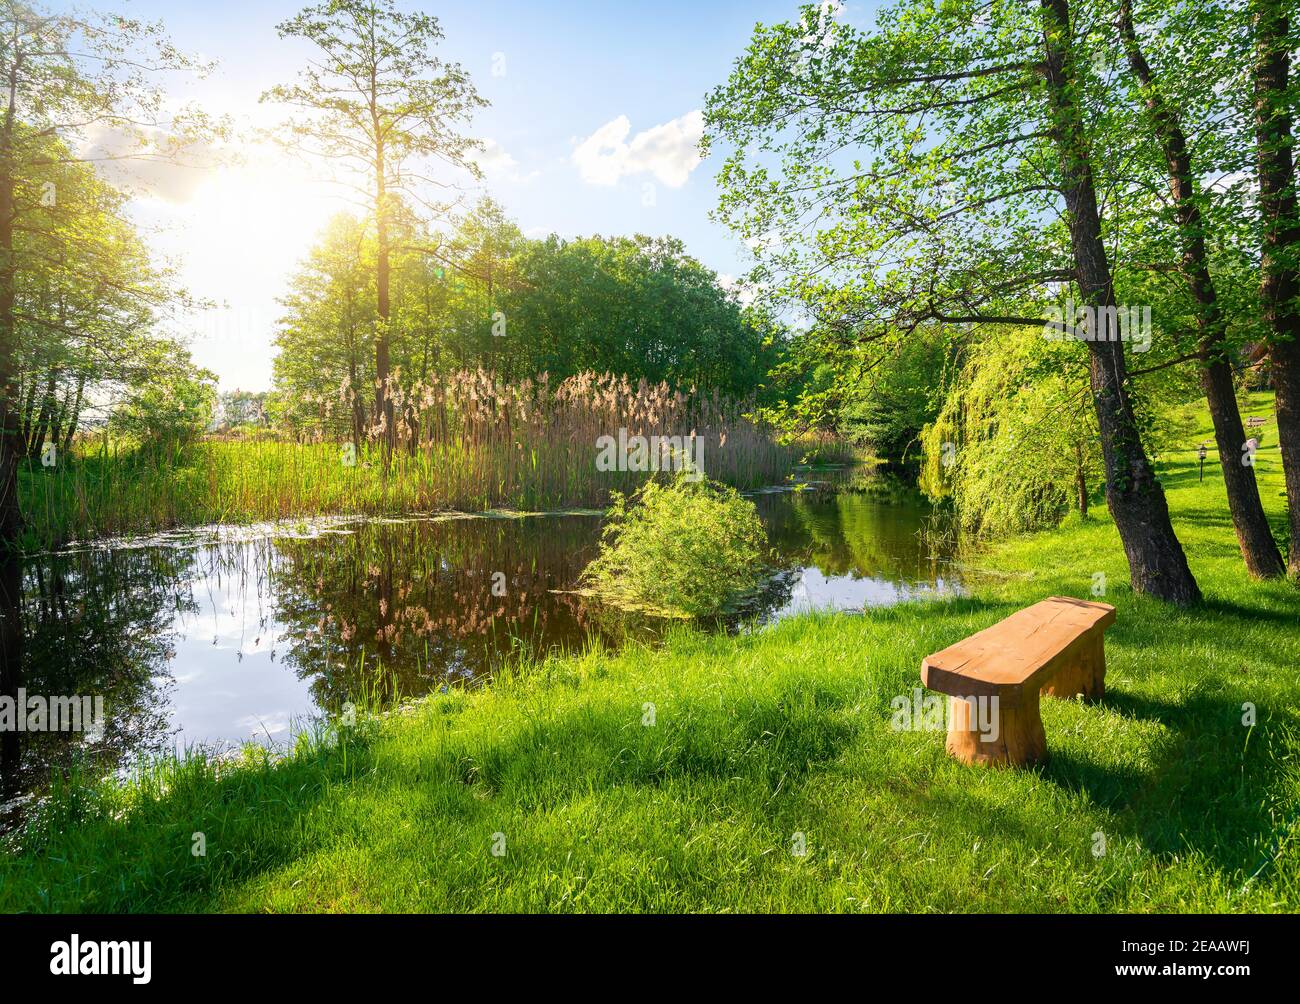 Wooden bench near river in the summer park Stock Photo